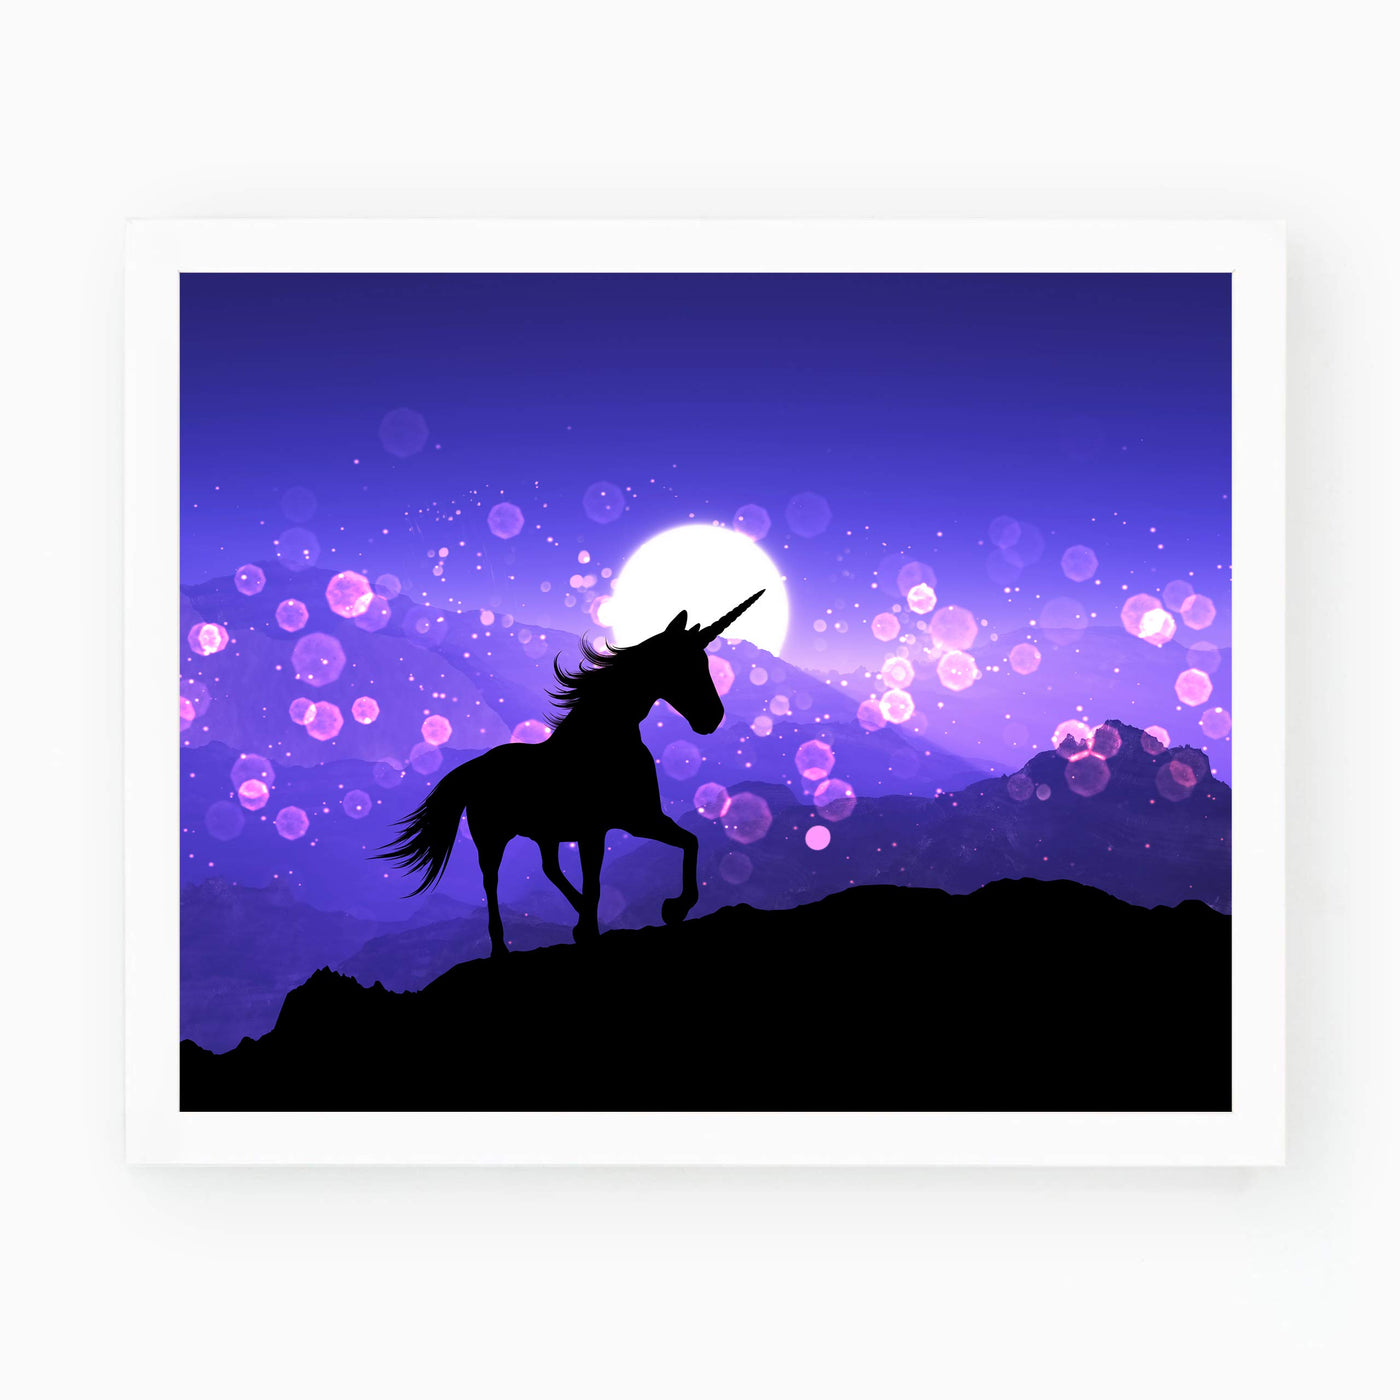 Magical Unicorn Under the Moon- 10 x 8" Wall Art Print- Ready to Frame. Home-Girls Bedroom-Nursery-Play Room Decor. Wall Prints for Animal Themes & Children's Wall Decor. Cute, Girly Decoration!